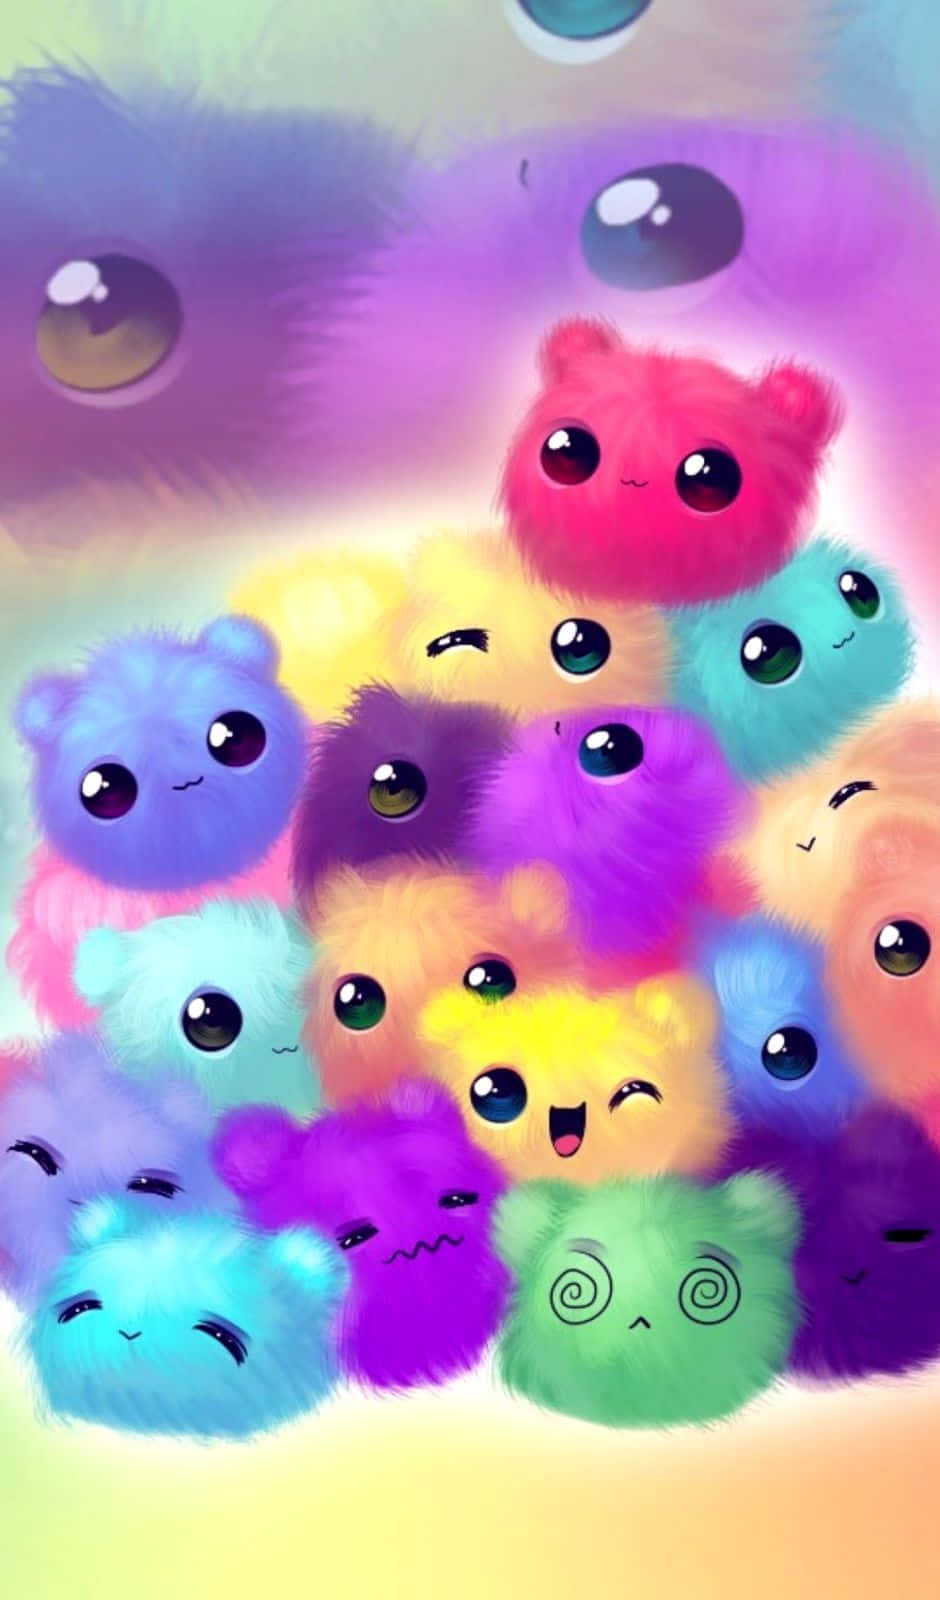 100+] Cute Colorful Background s | Wallpapers.com